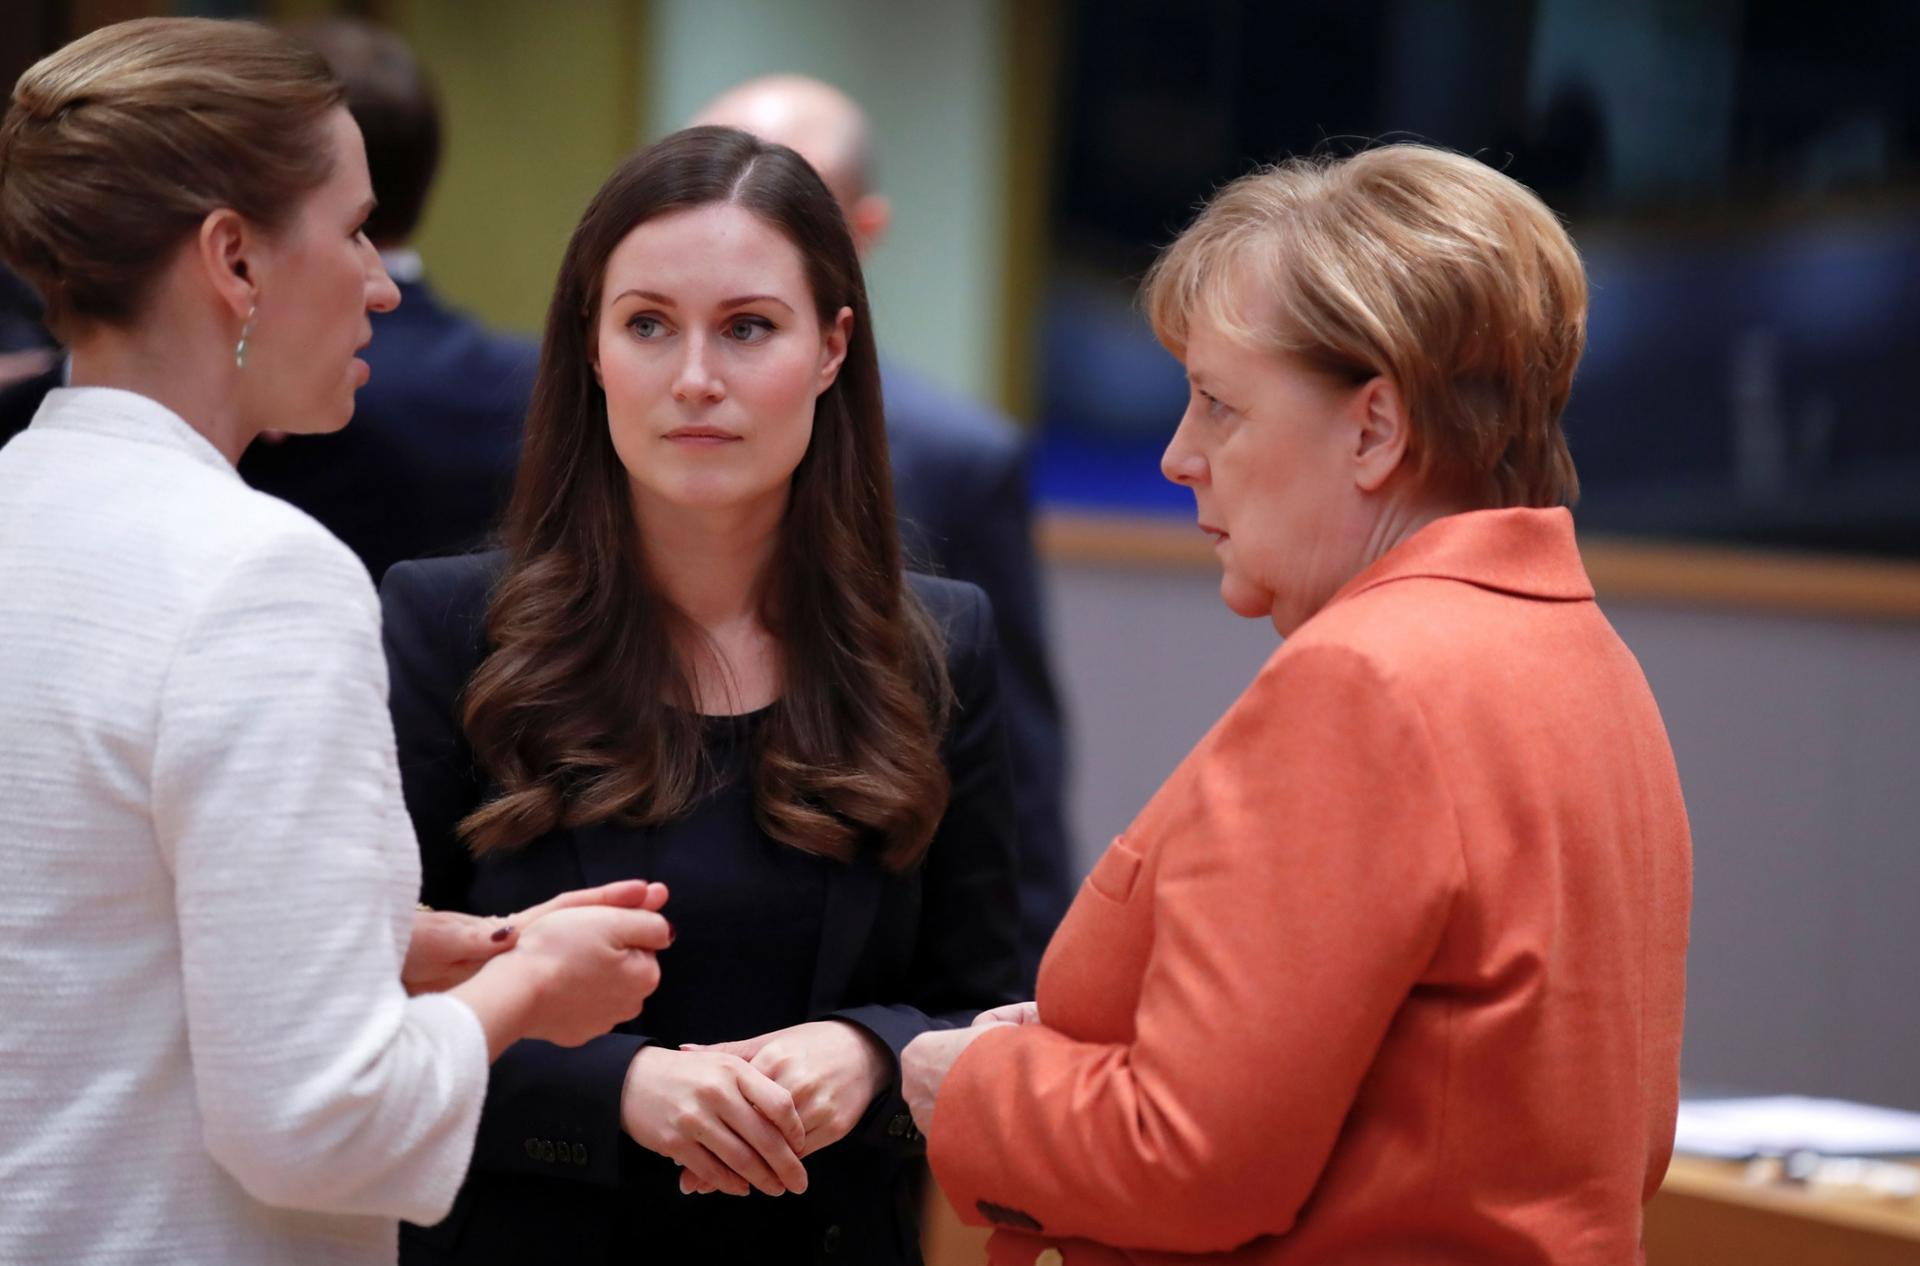 German Chancellor Angela Merkel, Finland's Prime Minister Sanna Marin and Denmark's Prime Minister Mette Frederiksen are shown standing, facing each other and talking.